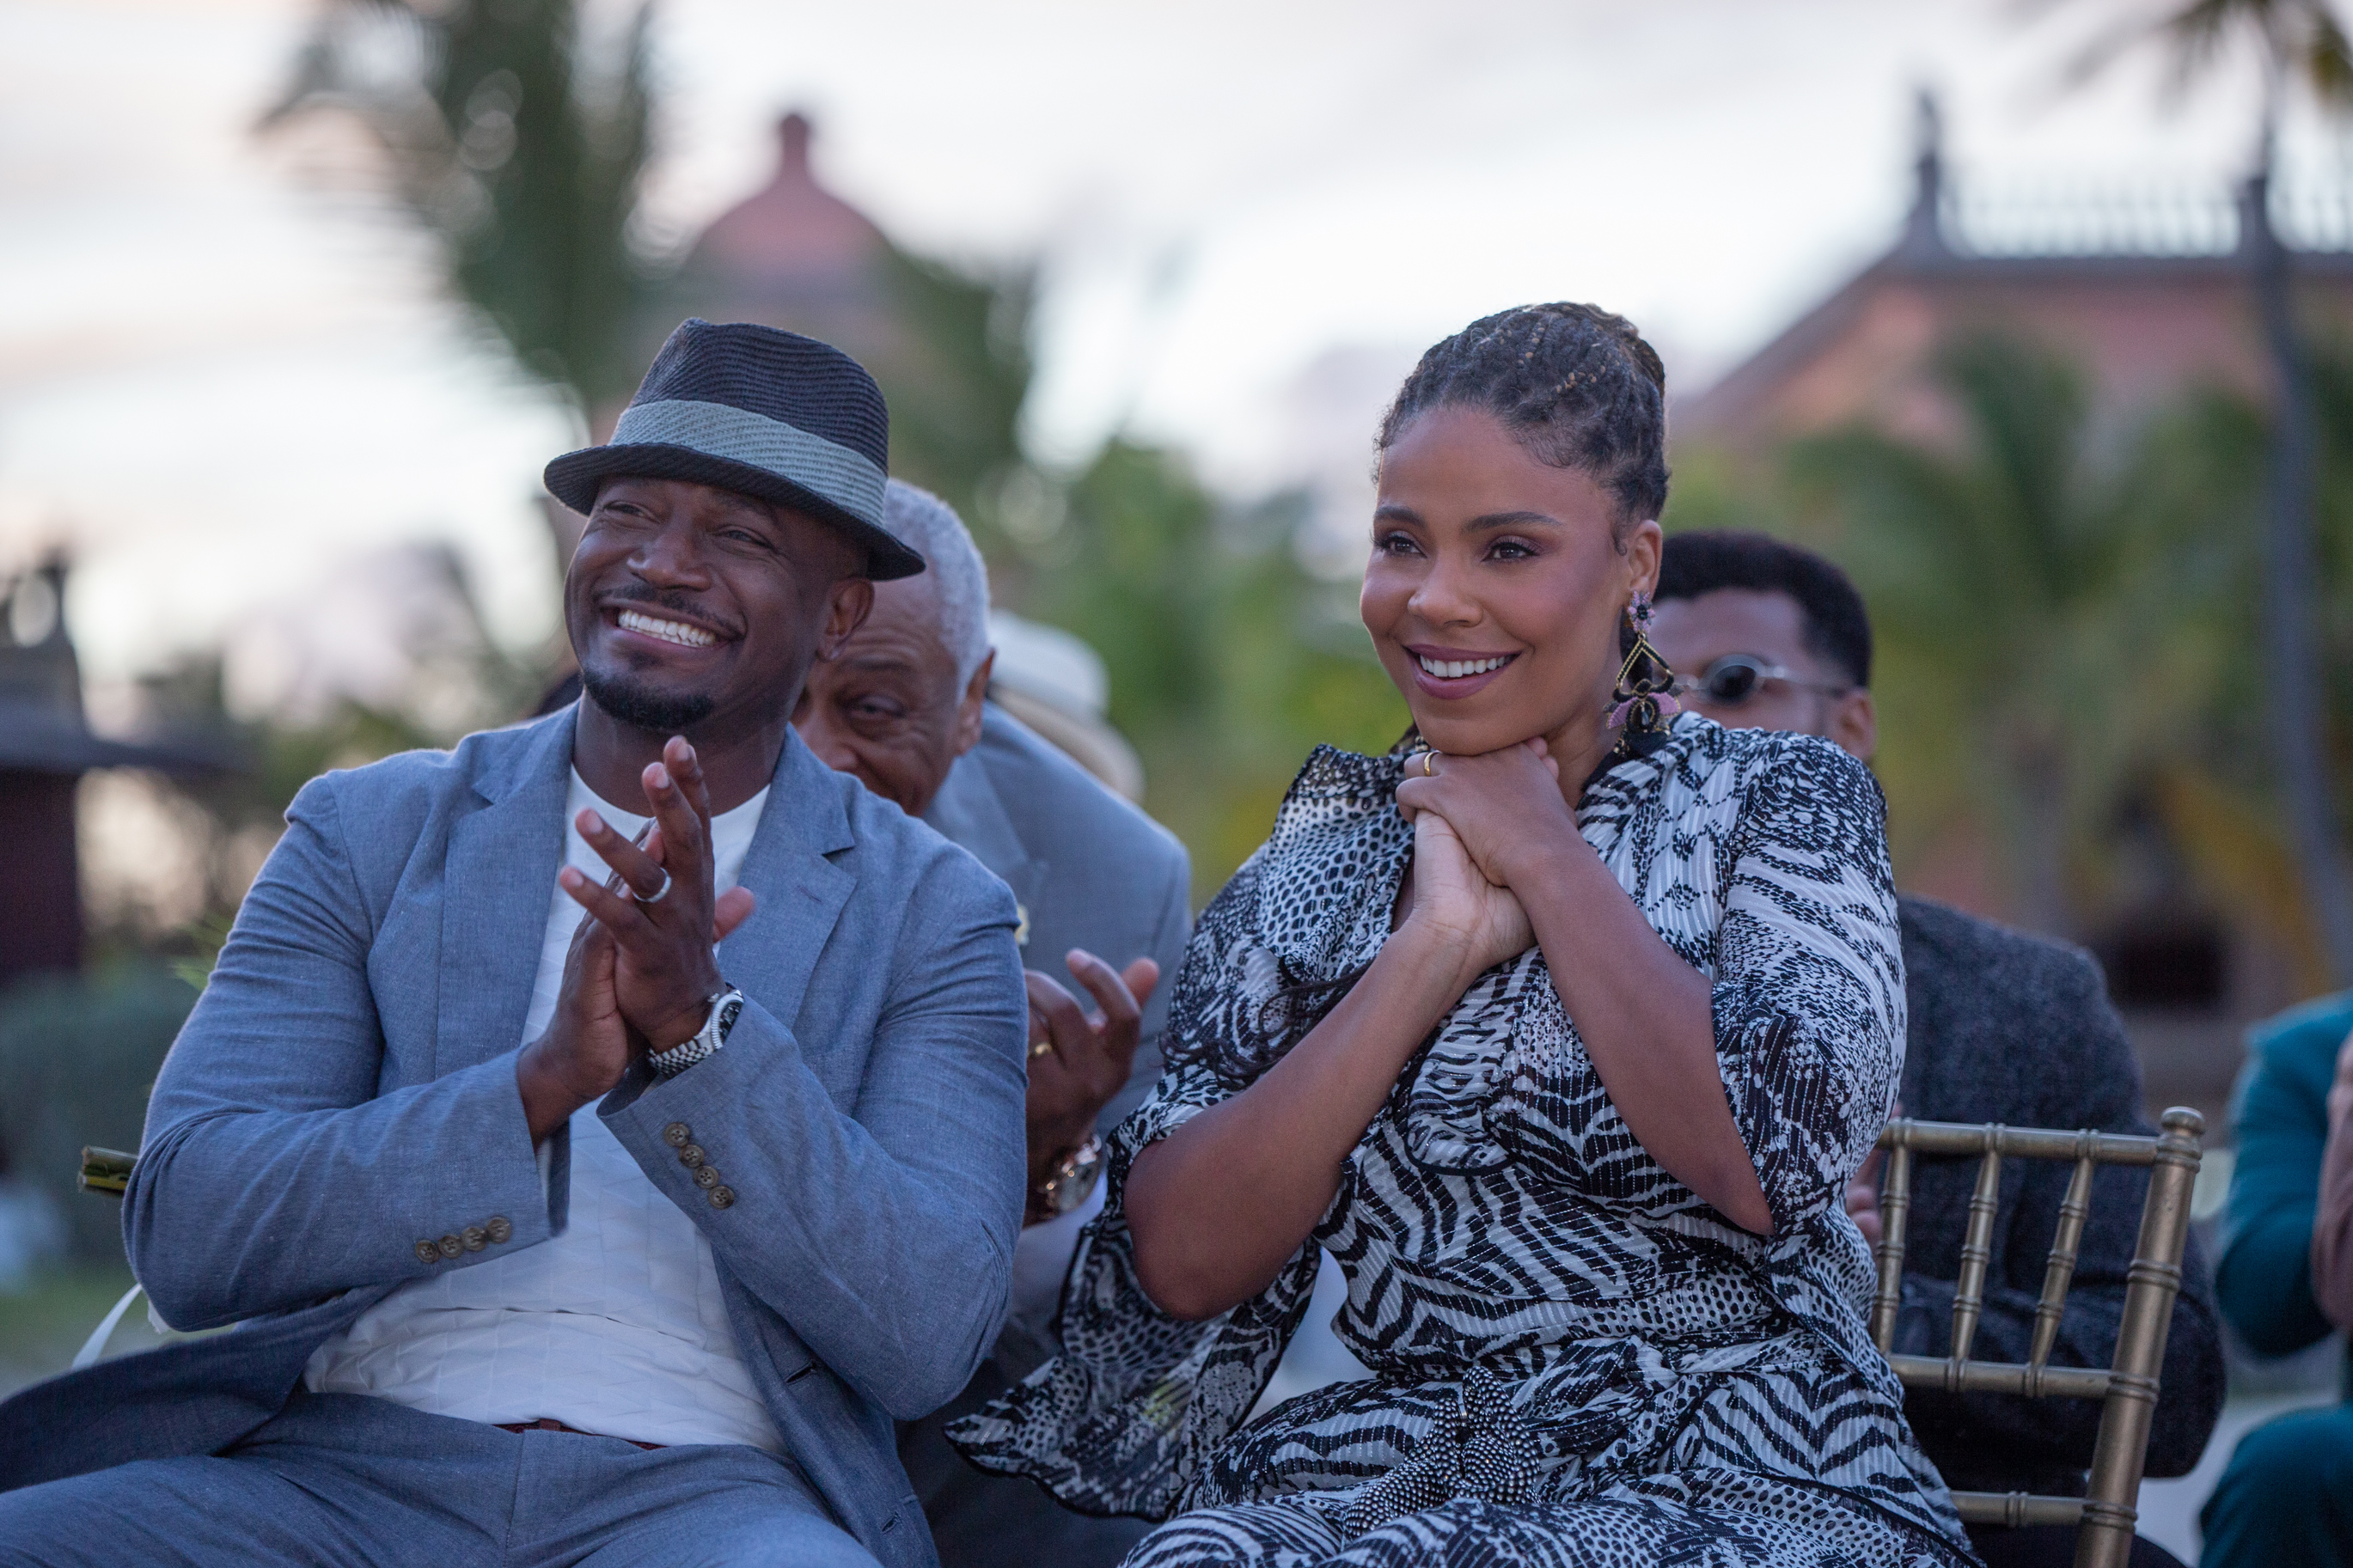 EXCLUSIVE: ‘The Best Man: The Final Chapters’ Cast Talk Reuniting On Set For The First Time In The Dominican Republic